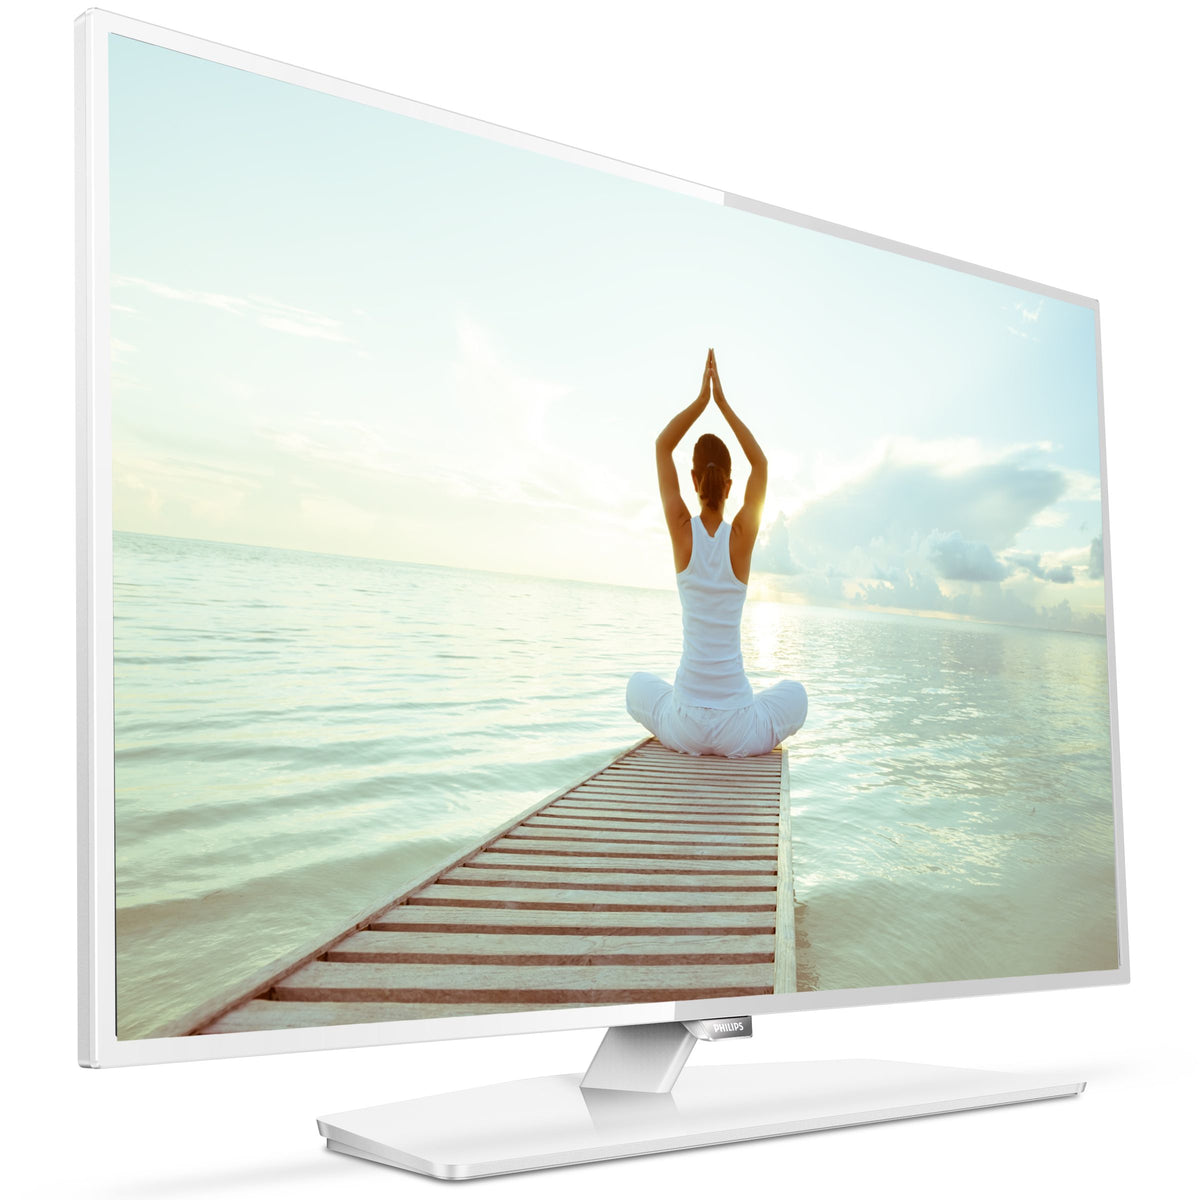 Philips 32HFL3011W - 32" EasySuite Diagonal Class LCD TV with LED Backlight - Hotel / Hospitality - 720p 1366 x 768 - White